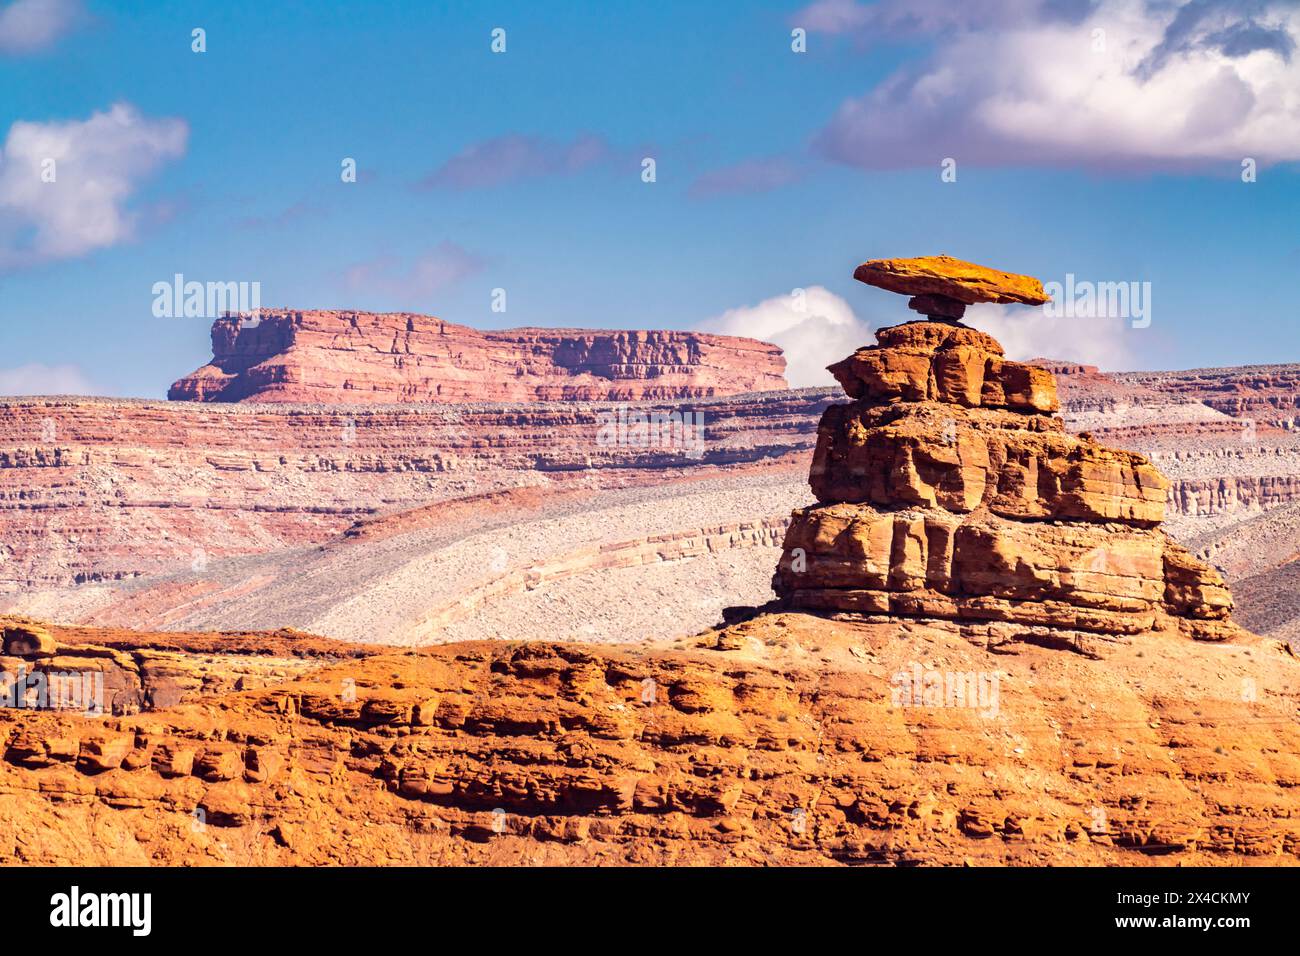 USA, Utah, Bear's Ears National Monument. Mexican Hat eroded rock formation. Stock Photo